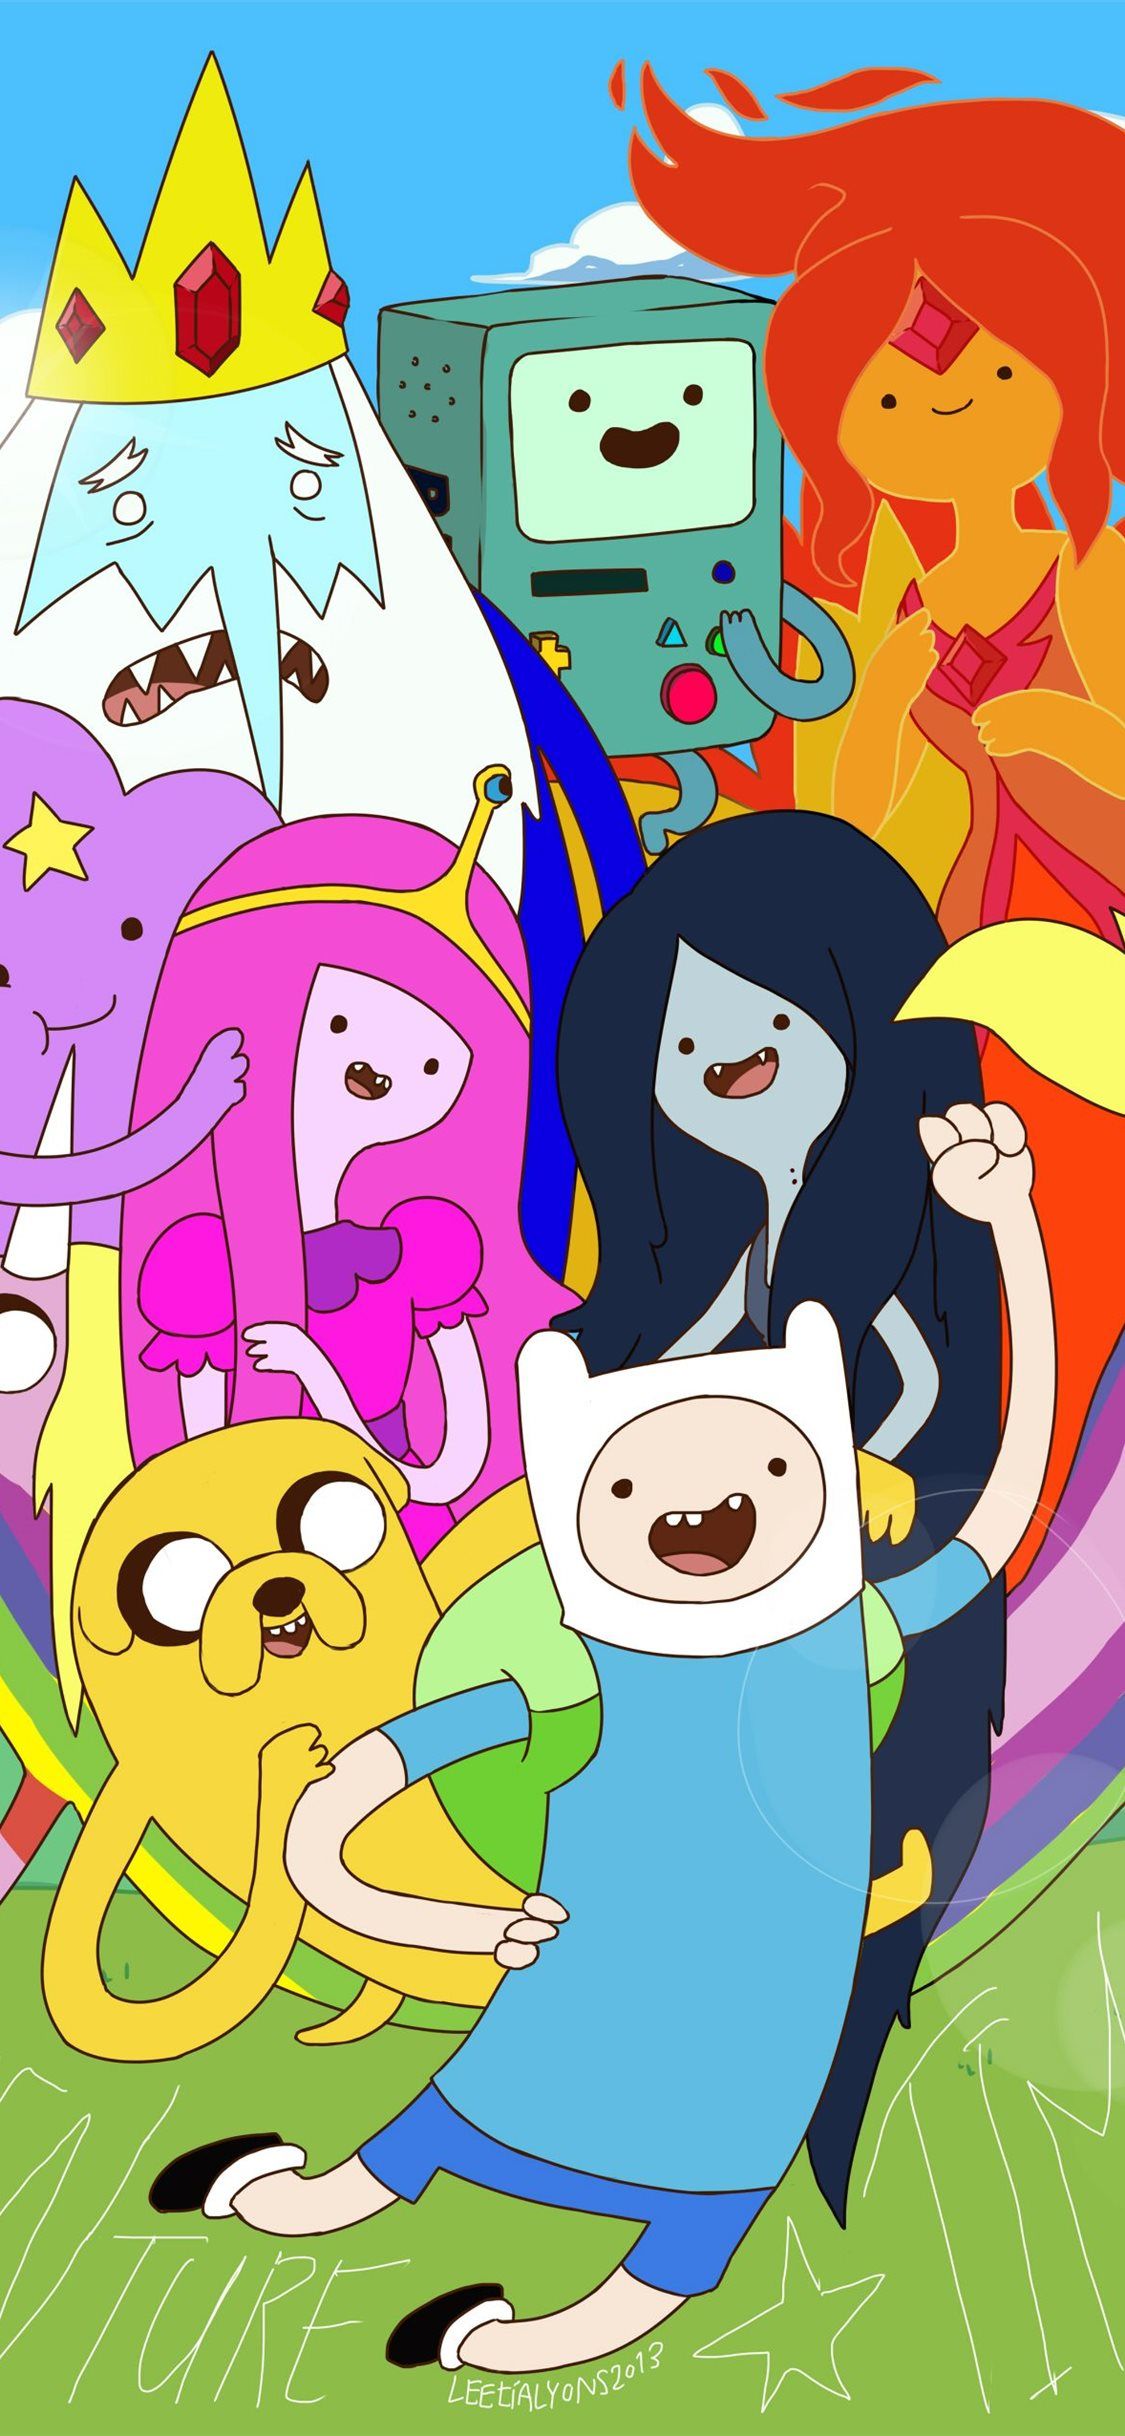 Adventure Time wallpaper for iPhone and Android devices. - Adventure Time